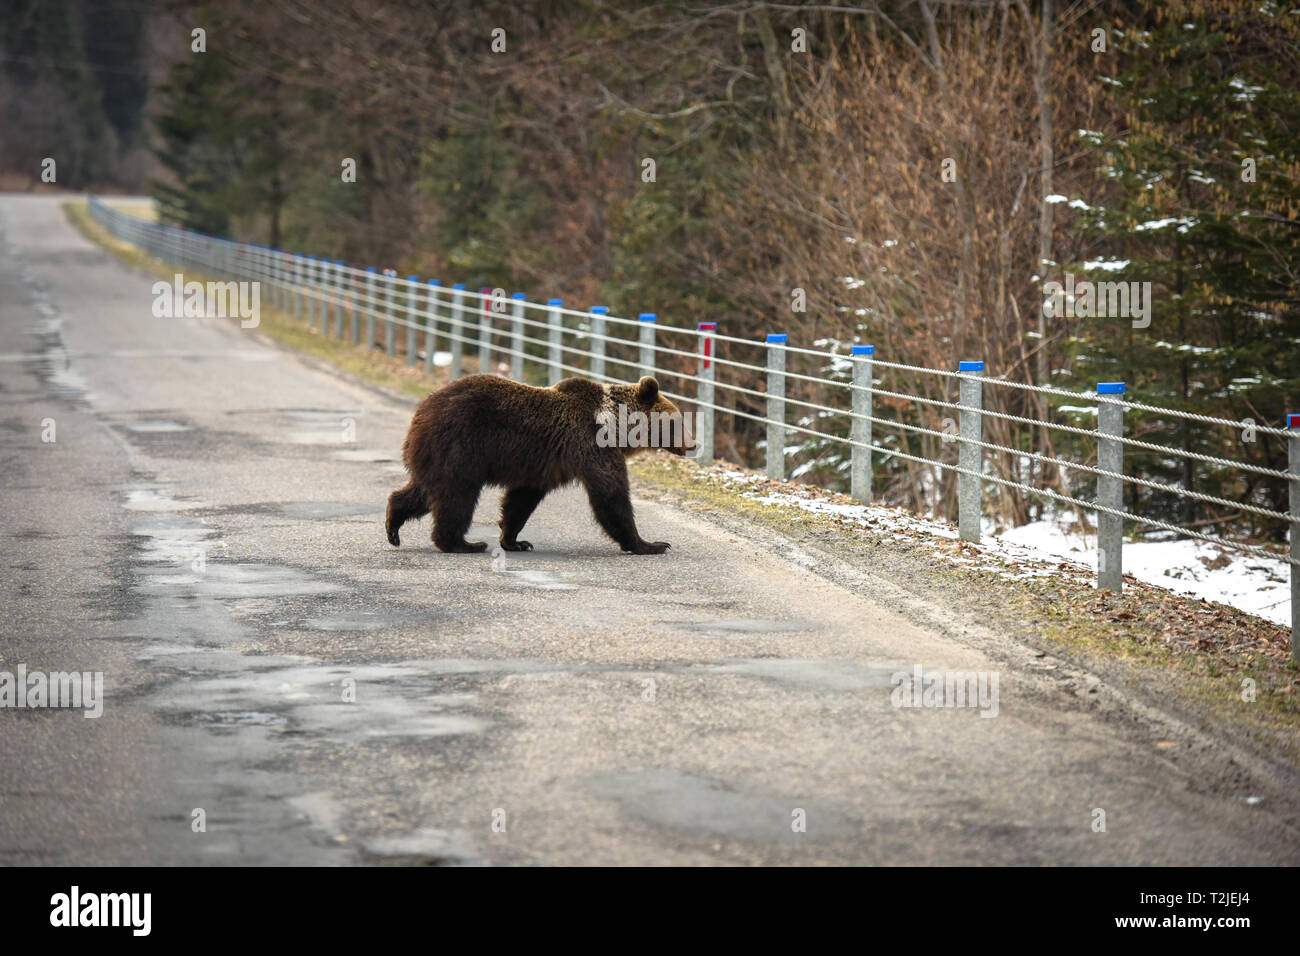 Brown bear crossing road in national park. Carpathian mountains, Poland, Europe Stock Photo